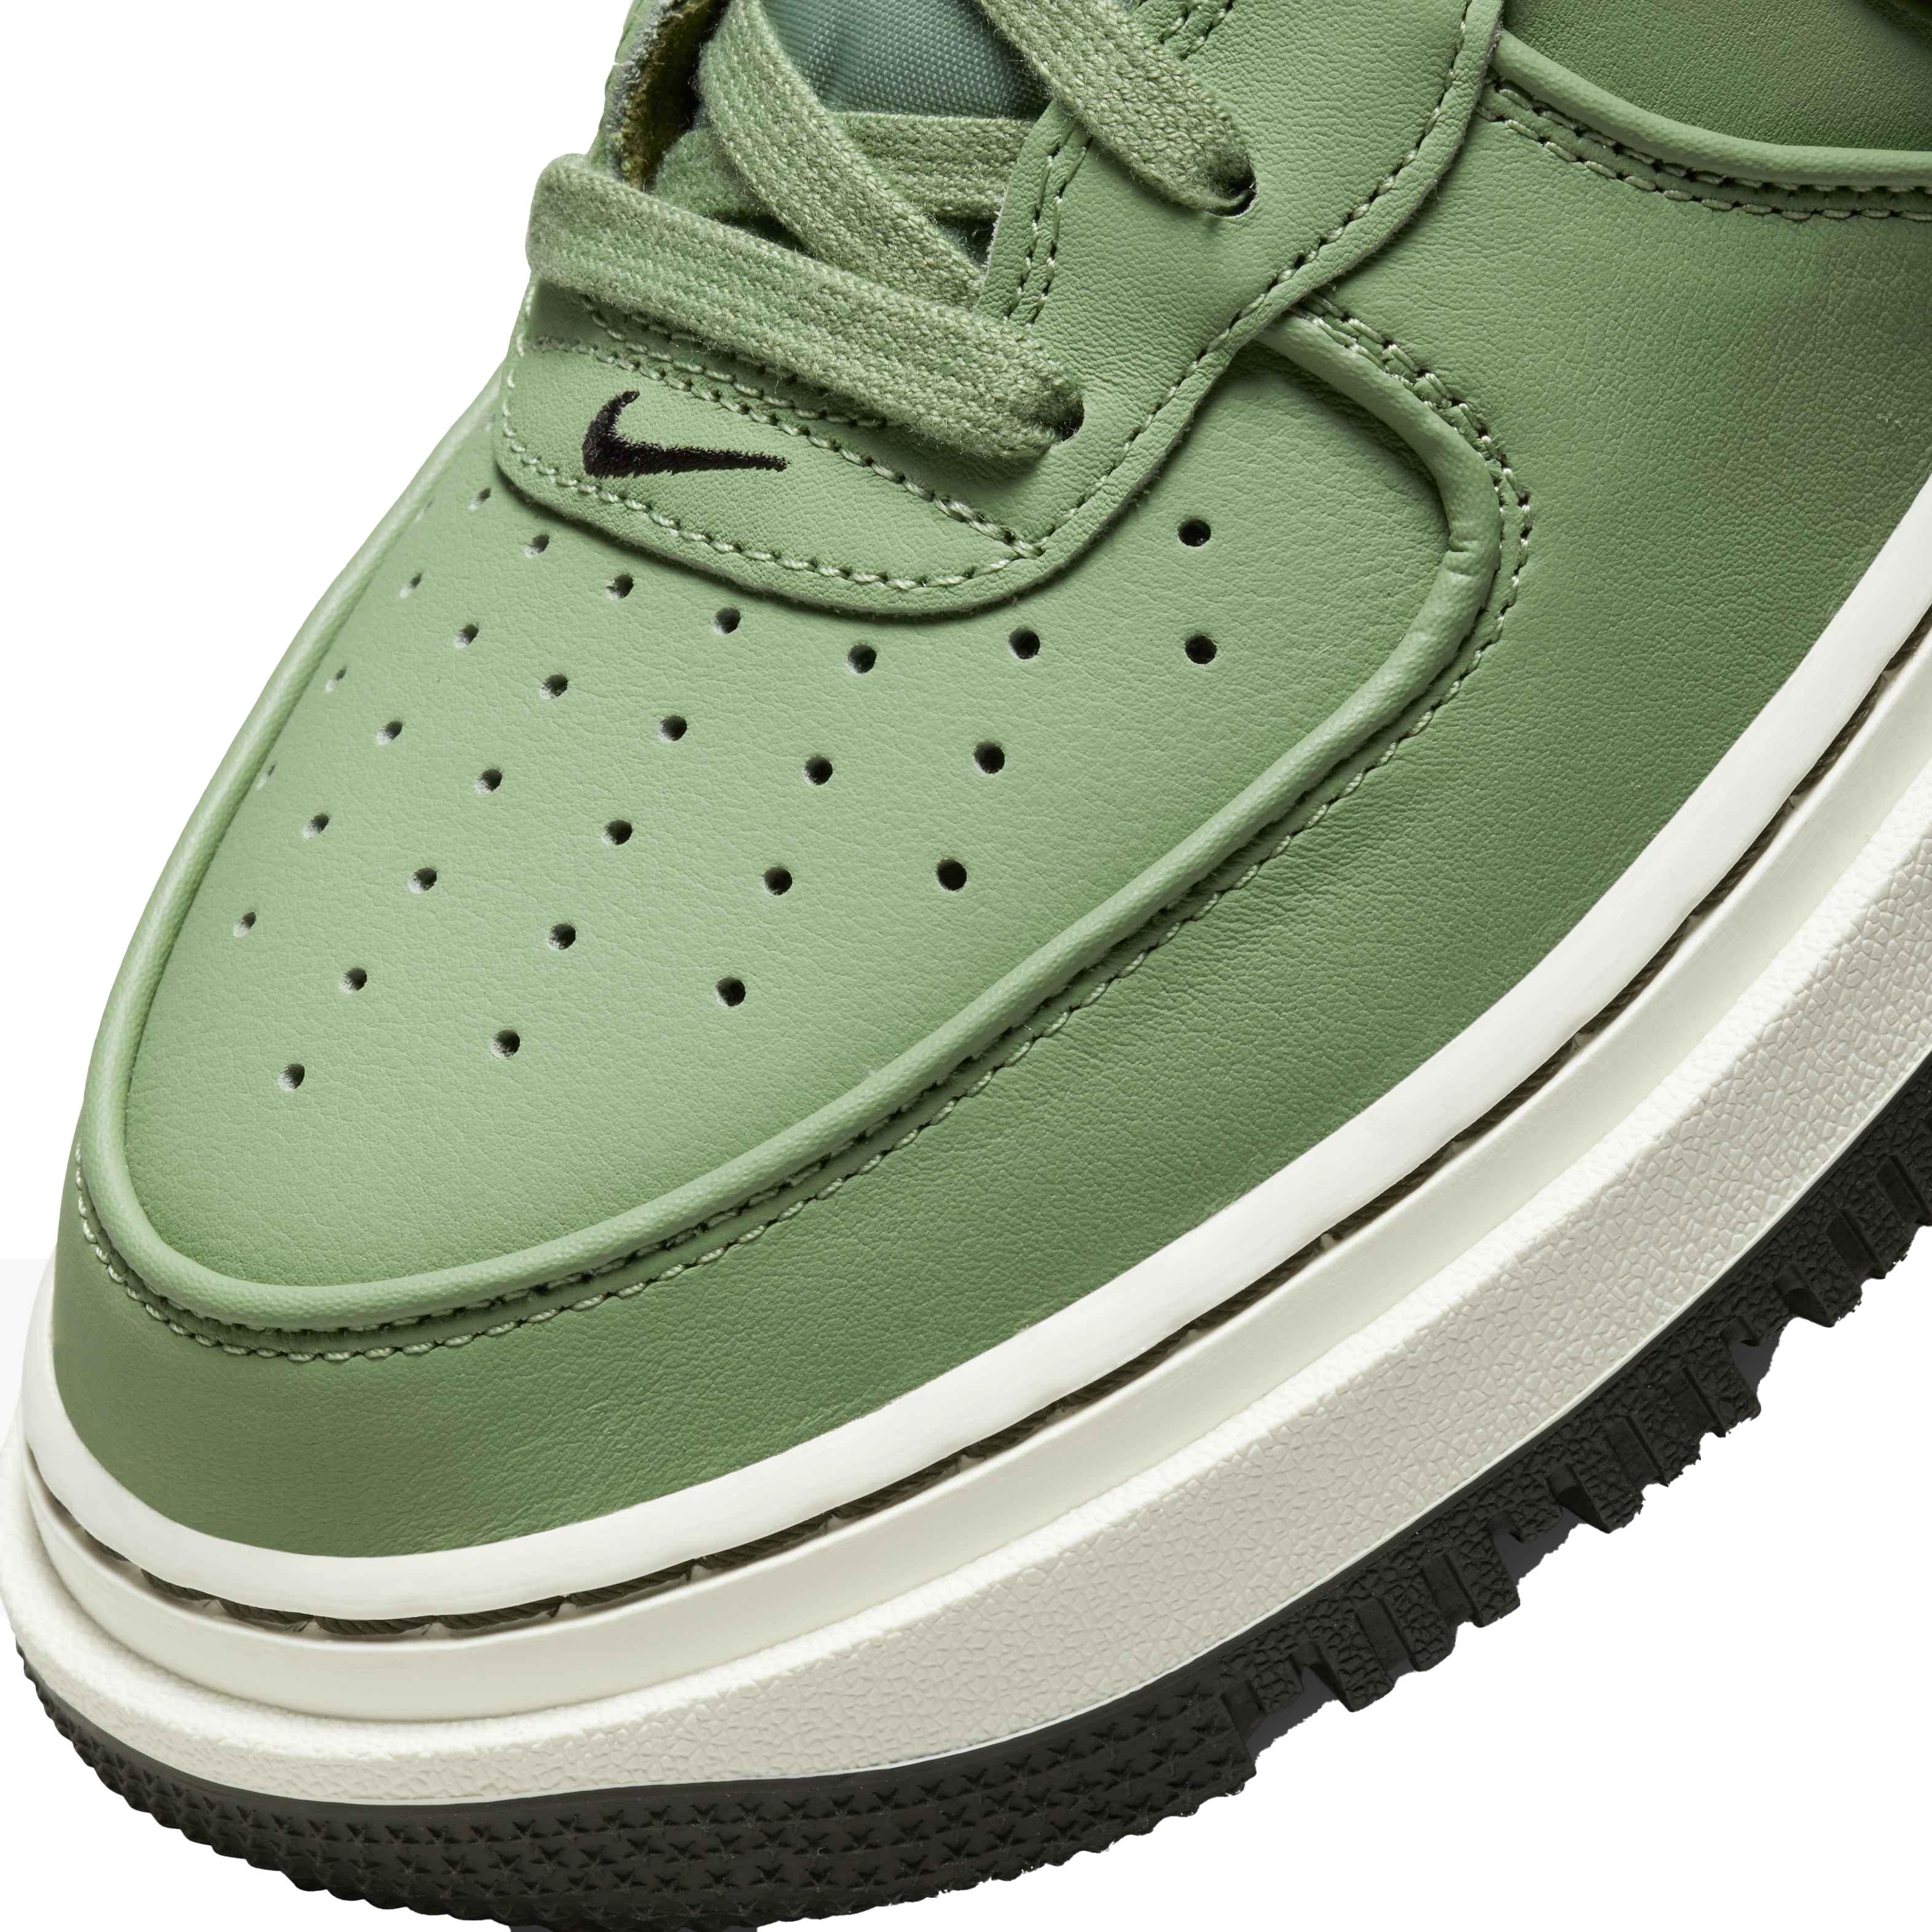 Nike Air Force 1 Boot Oil Green Sneakers - Farfetch